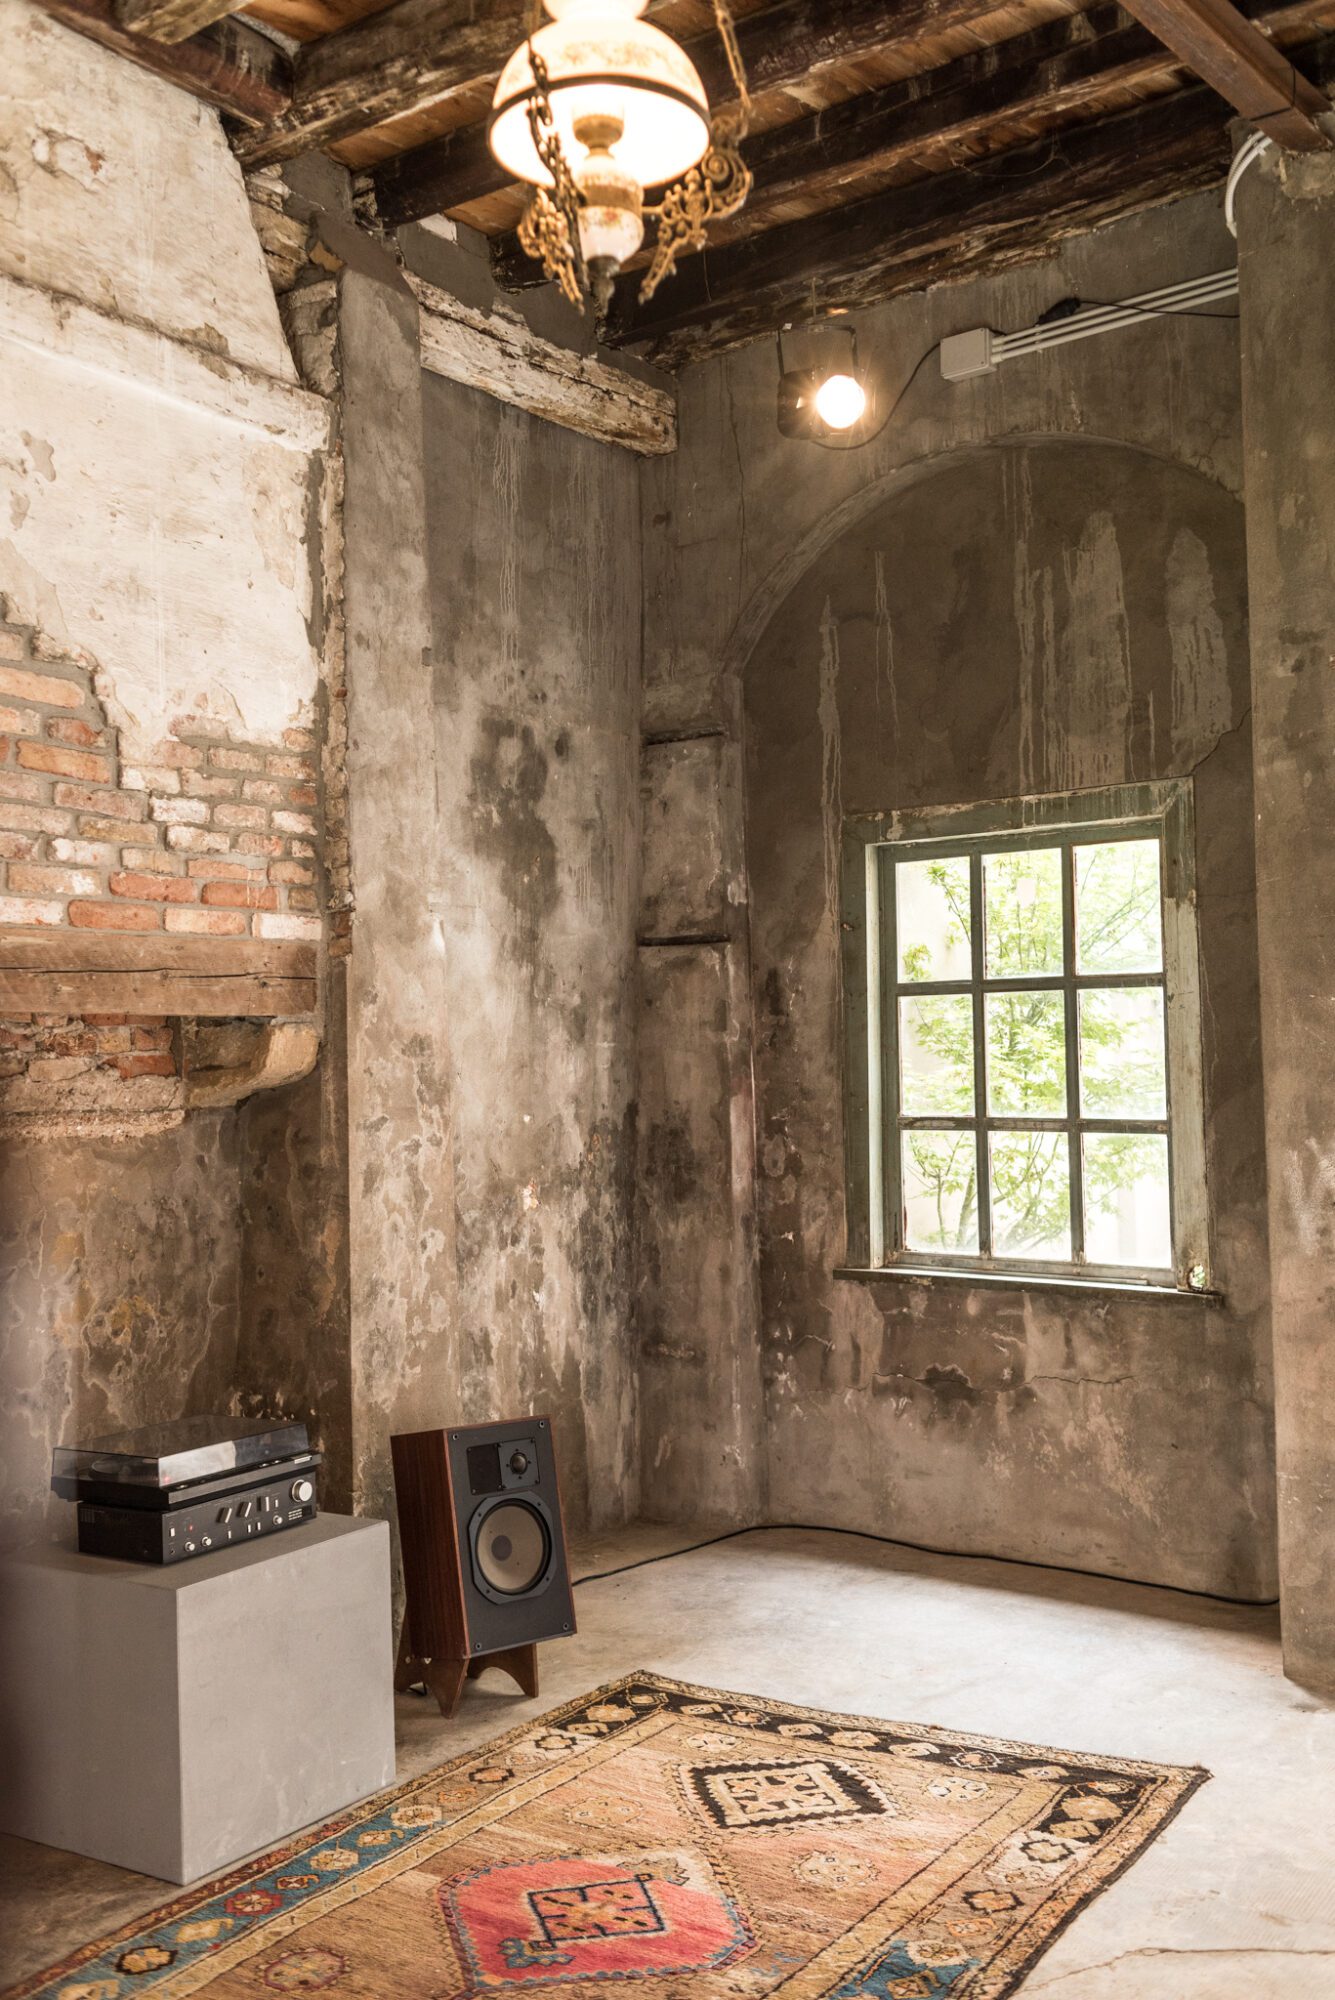 An installation view of Andrius Arutiunian piece with two speakers, a vinyl player, and carpets at Venice Biennale